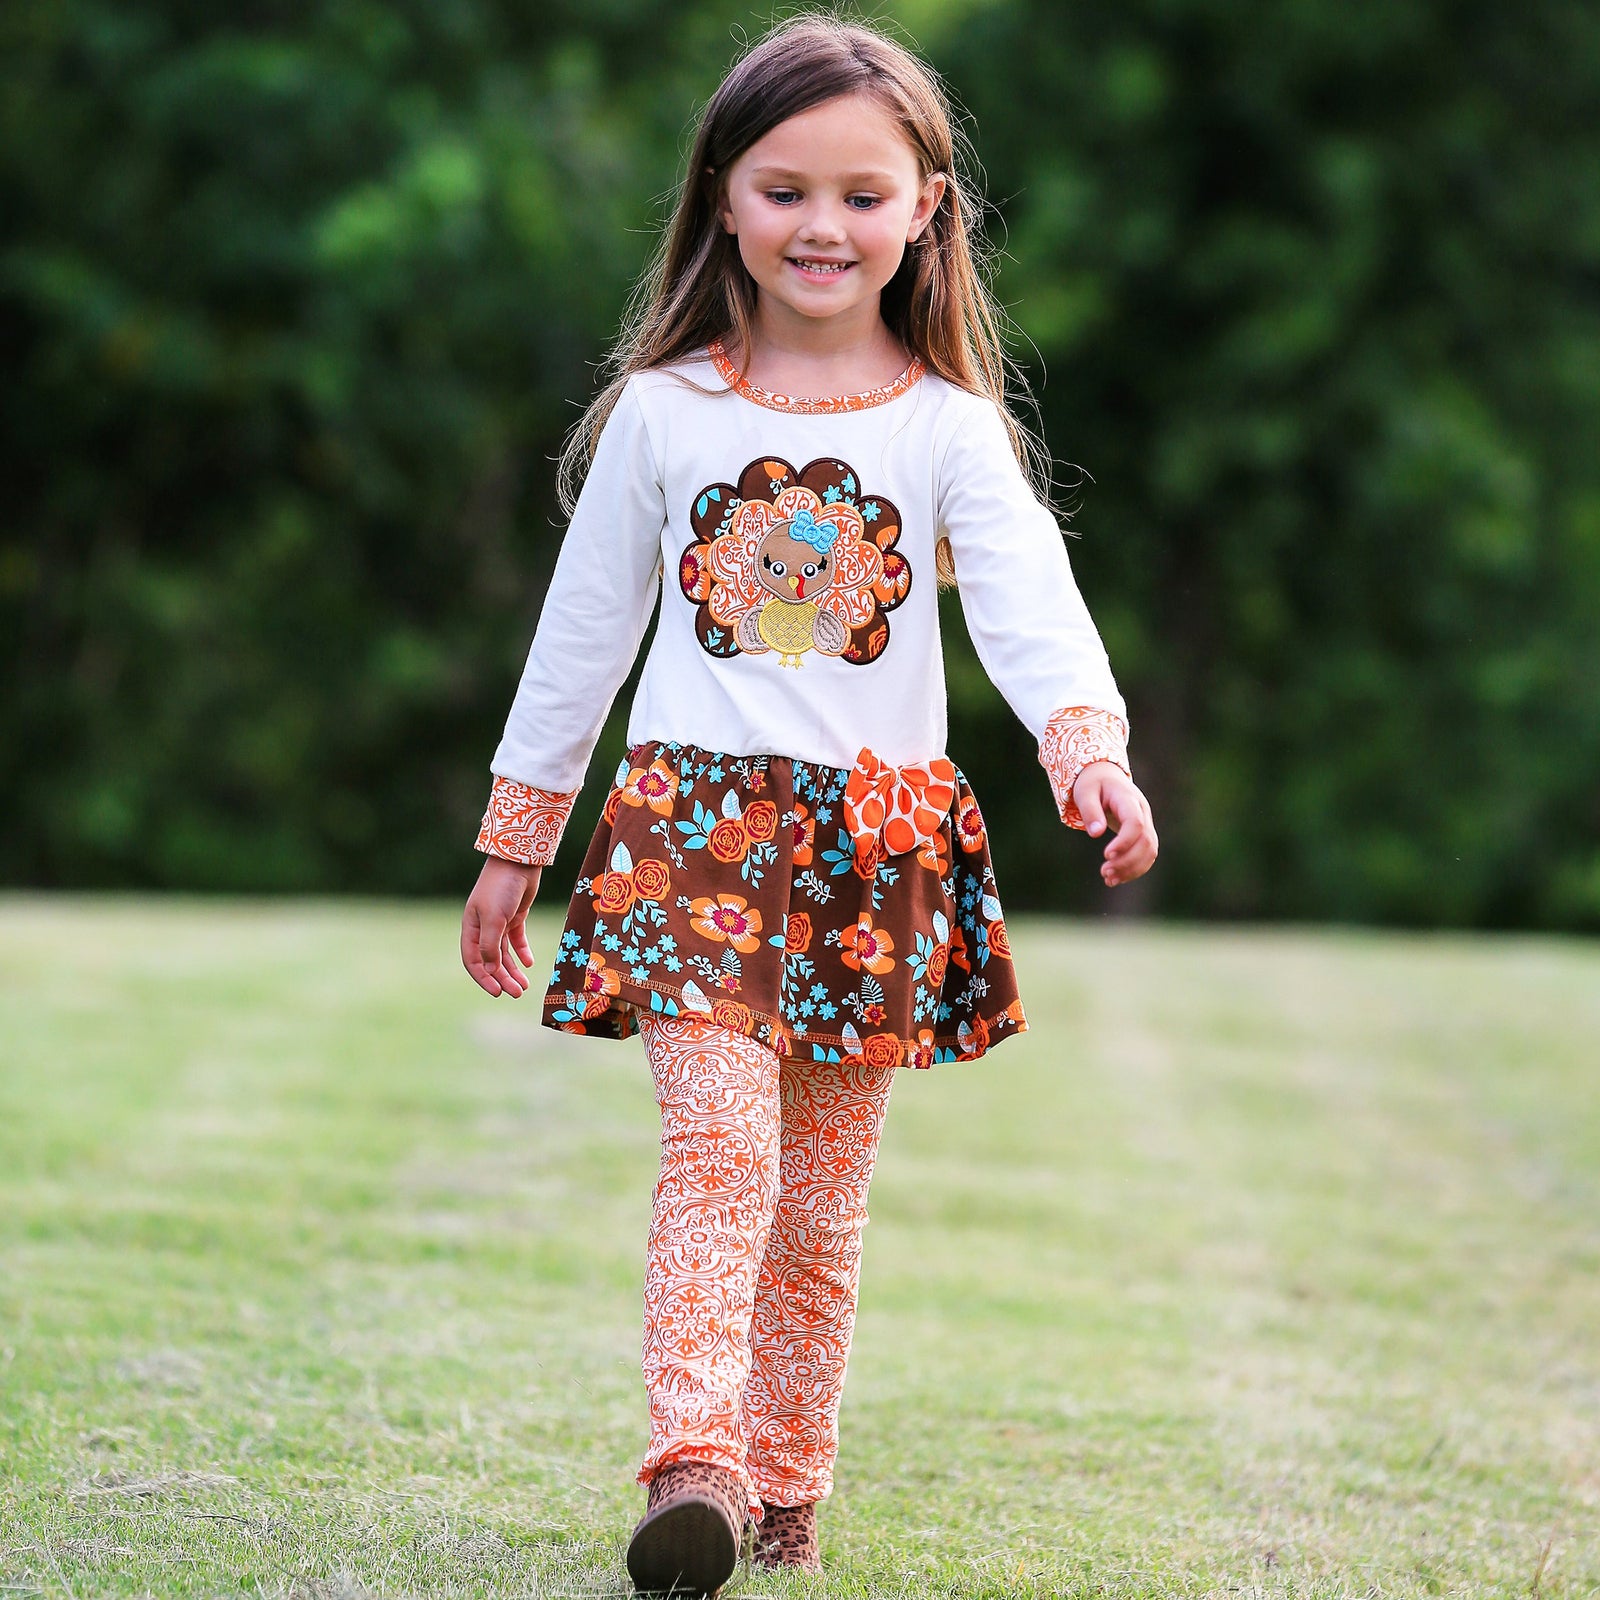 Autumn Floral Turkey Tunic & Leggings Holiday Big Little Girls Clothes by AnnLoren